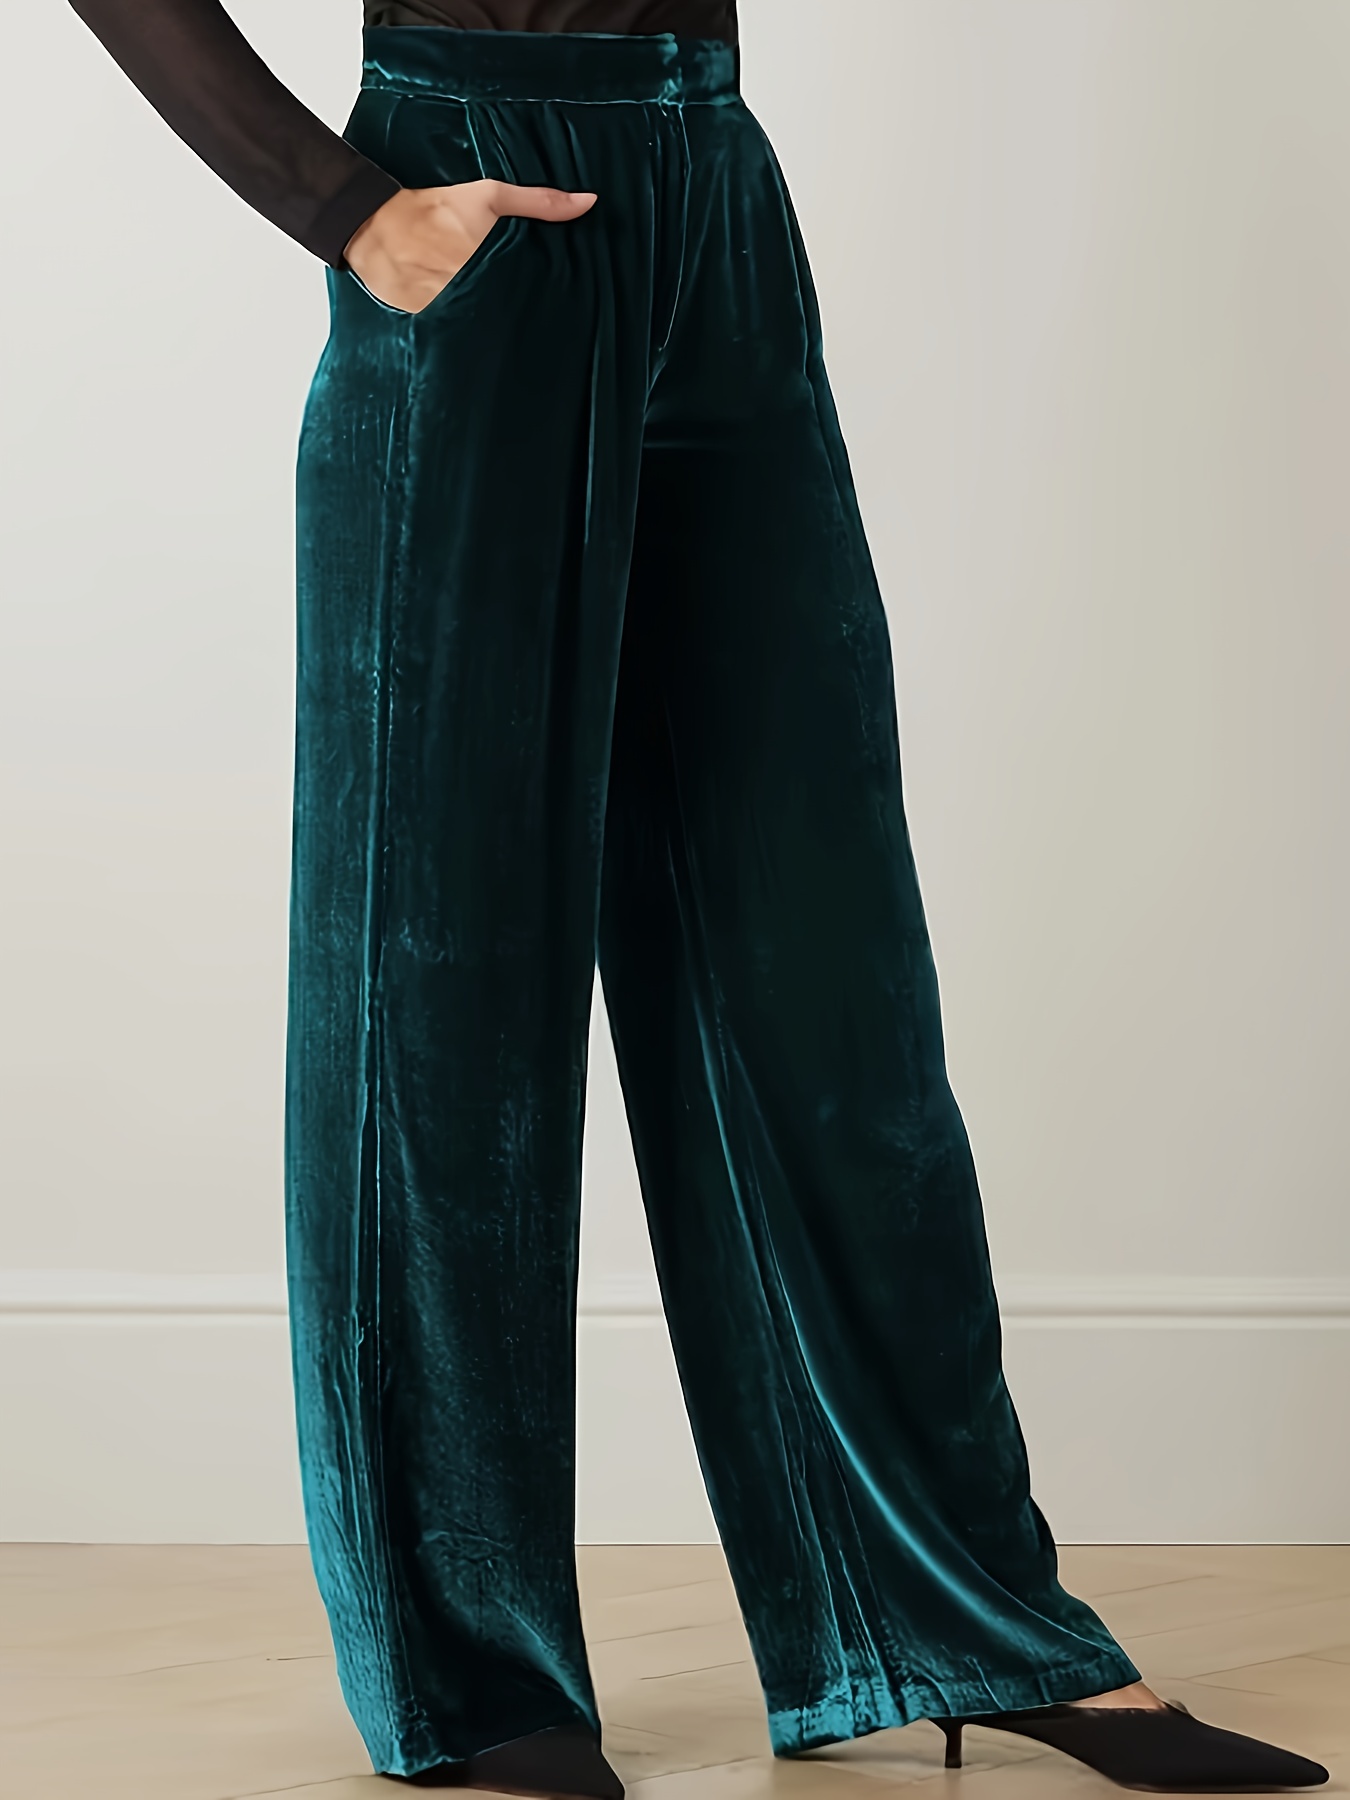 Plus Size Pants for Women Velvet High Waisted Pant Trousers Straight Leg  90s Vintage Spring Casual Relaxed Fit Pants 